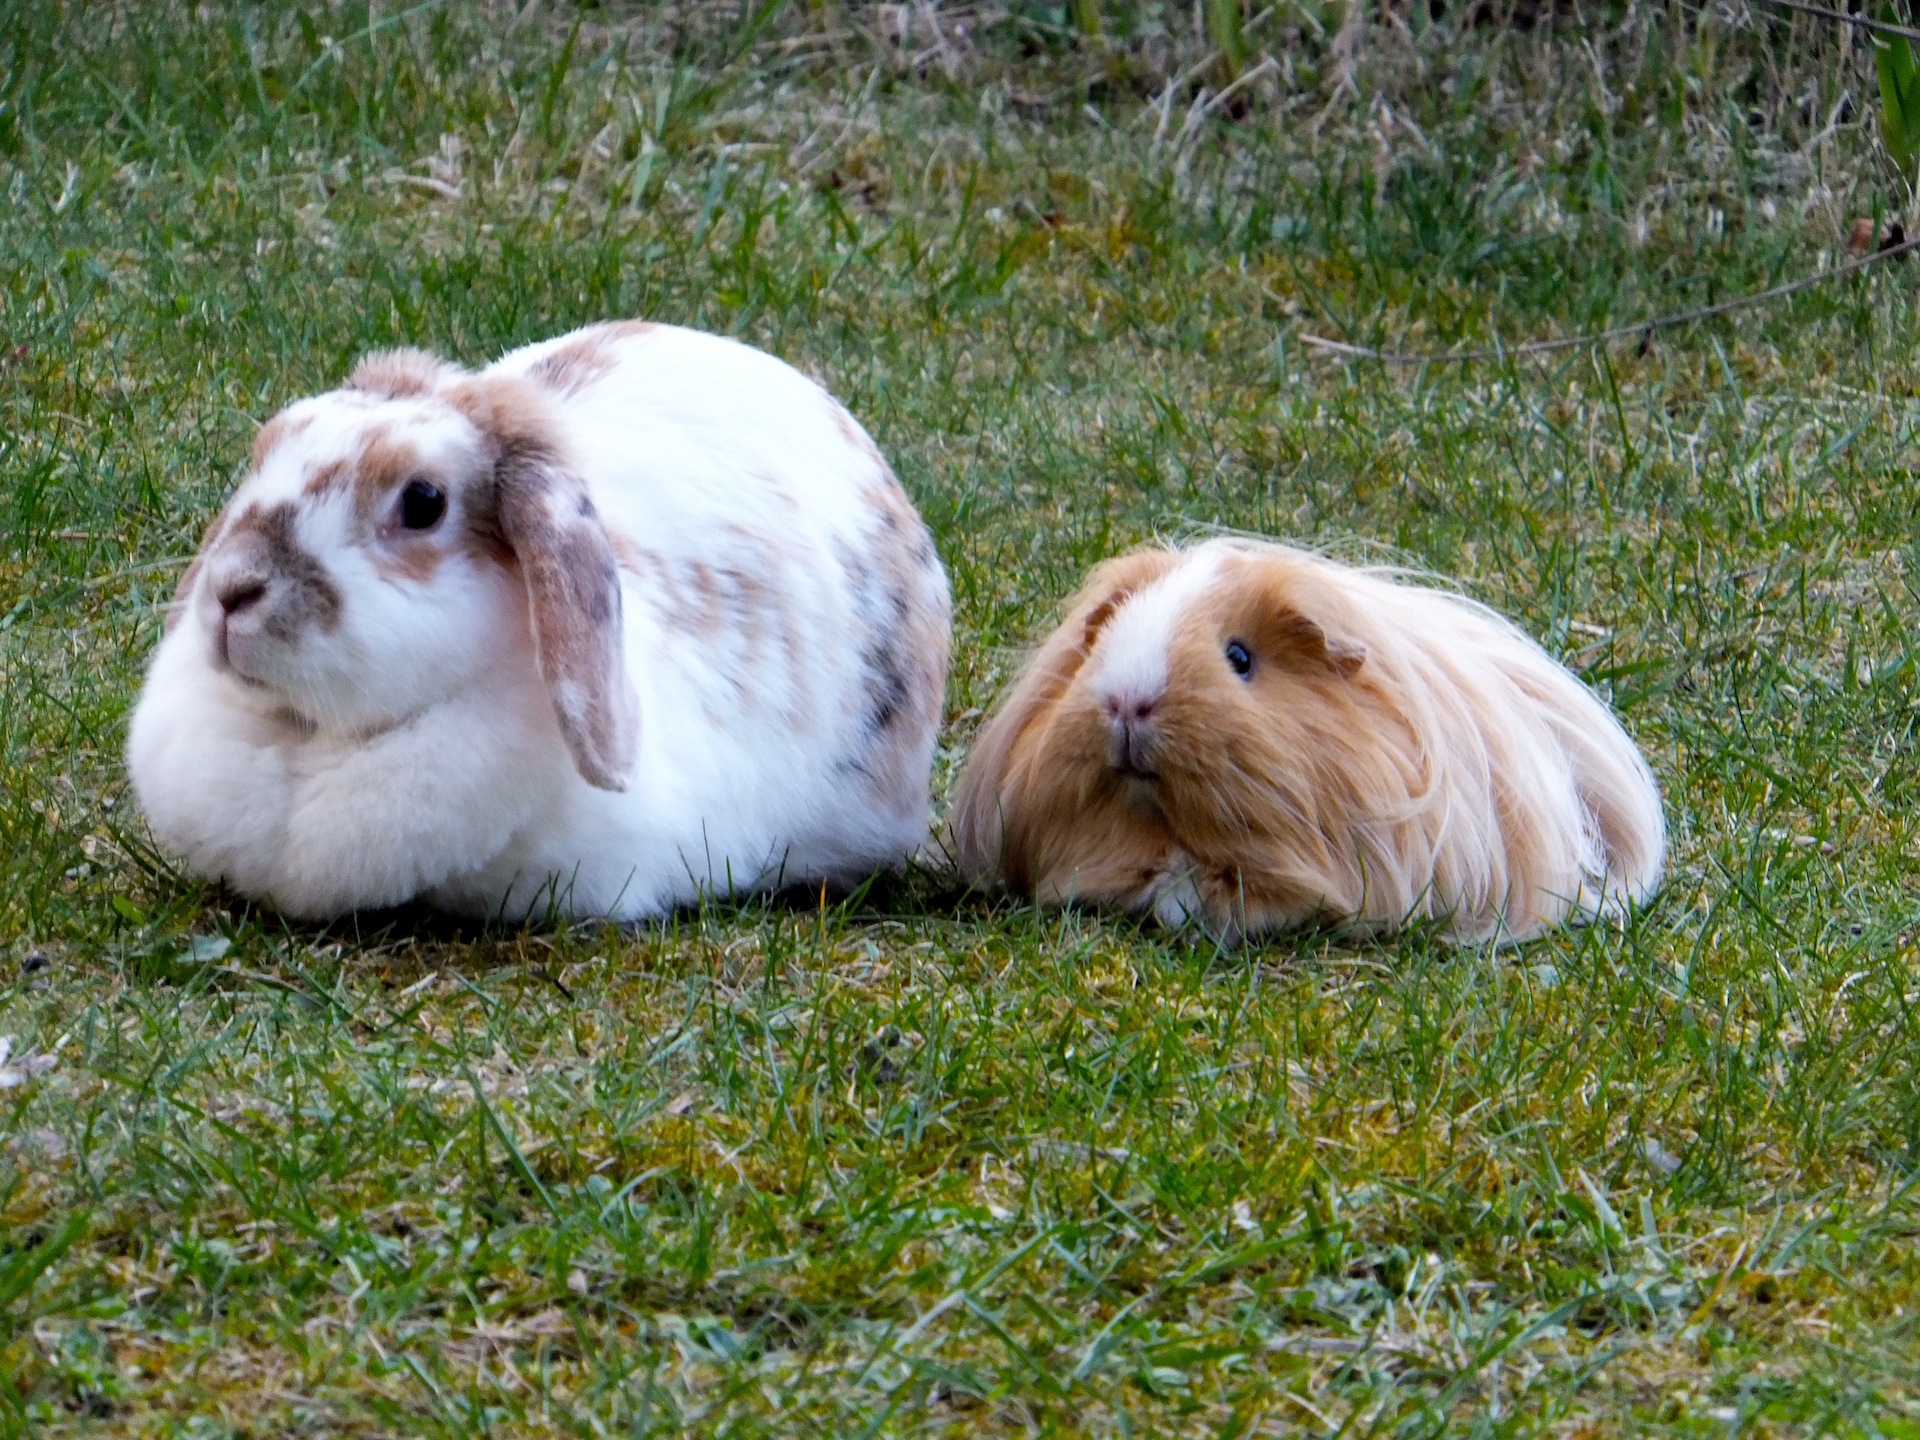 Bunny and Her Guinea Pig Friend Relax Together in the Garden